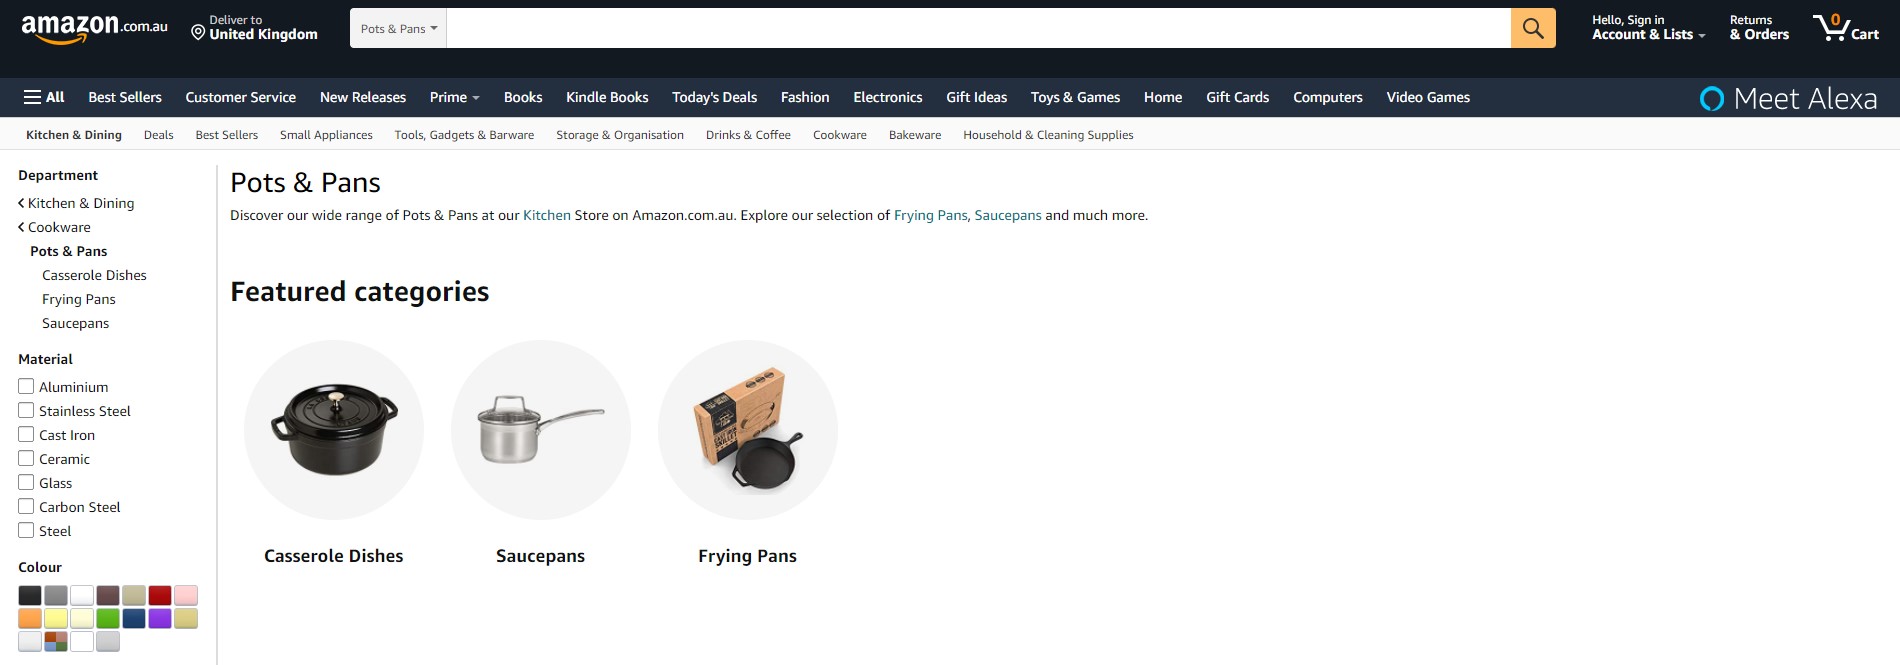 Example of an e-commerce category page